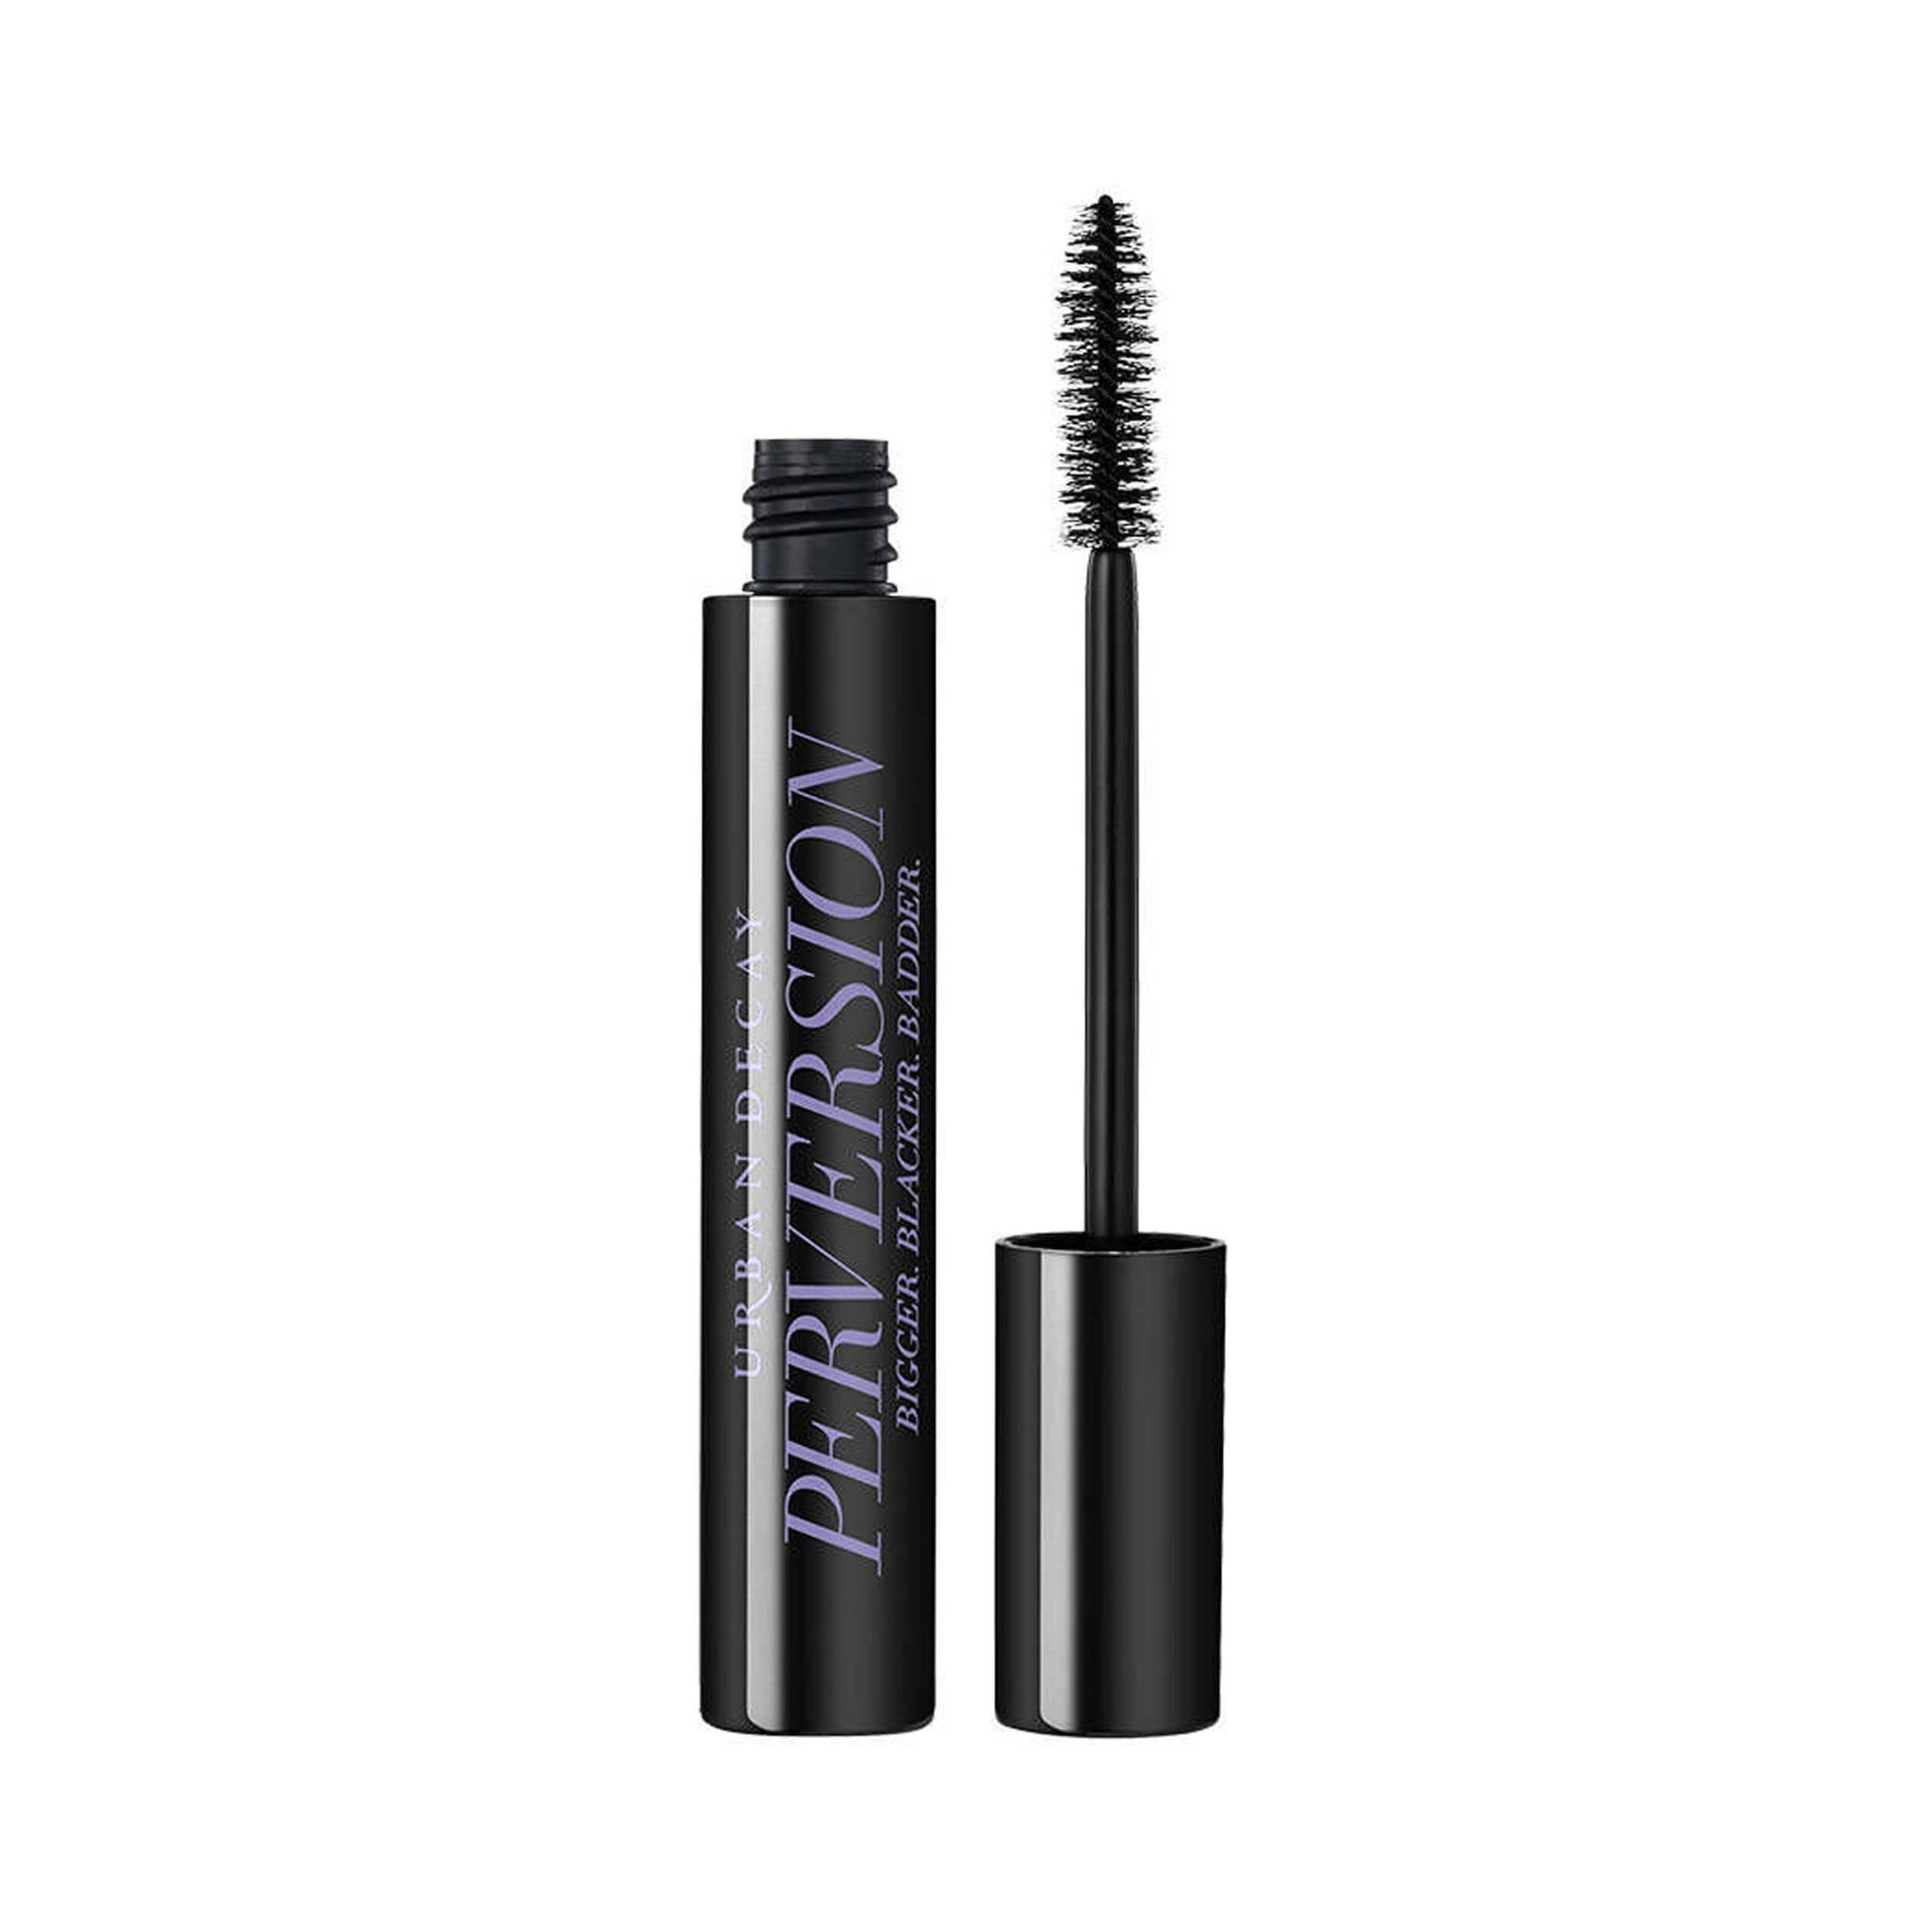 Urban Decay Primed For Perversion Set